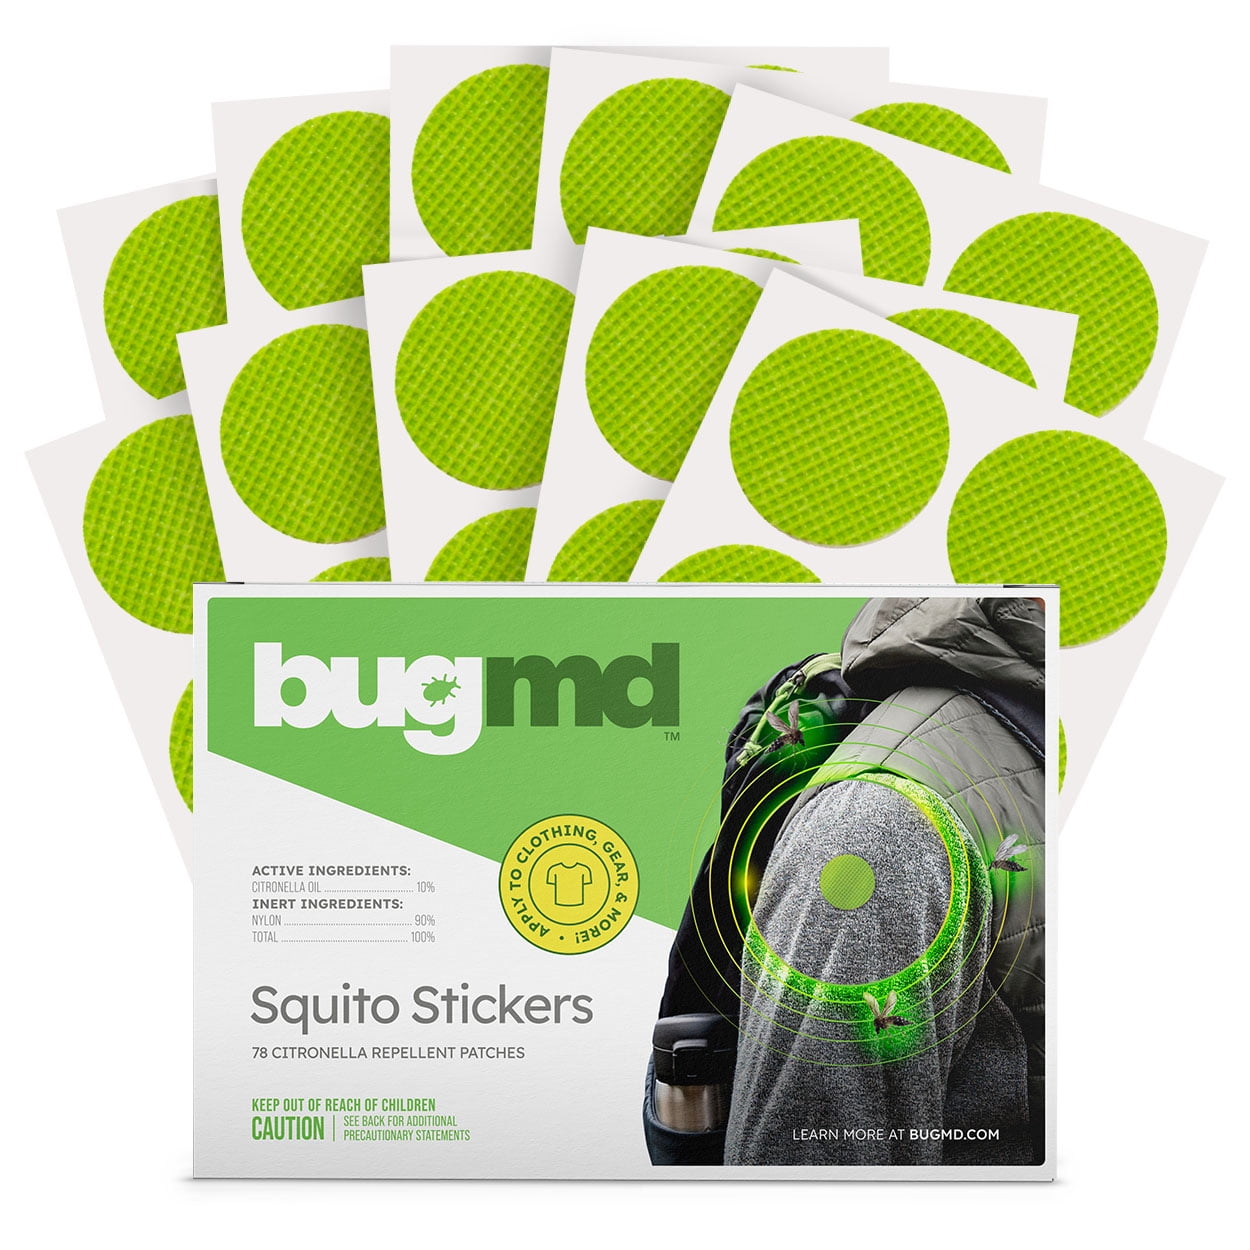 BugMD Squito Stickers for Adults, Citronella-Based Mosquito Repellent  Patches 